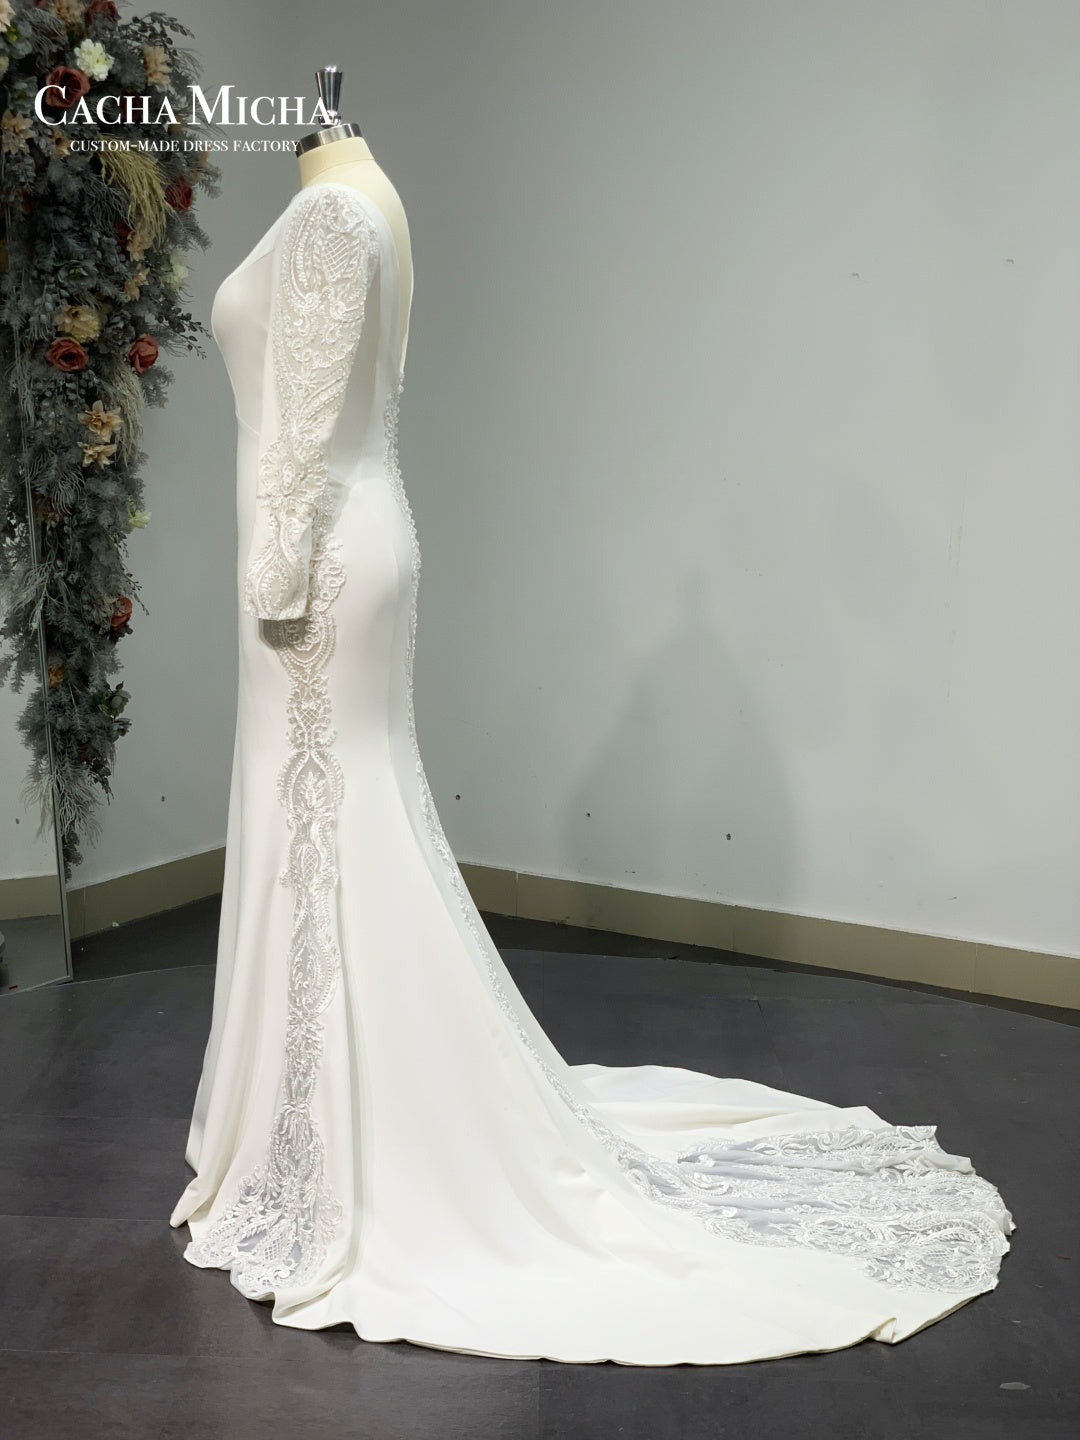 Elegant Long Sleeves Illusion Lace Crepe Bridal Gown R4480